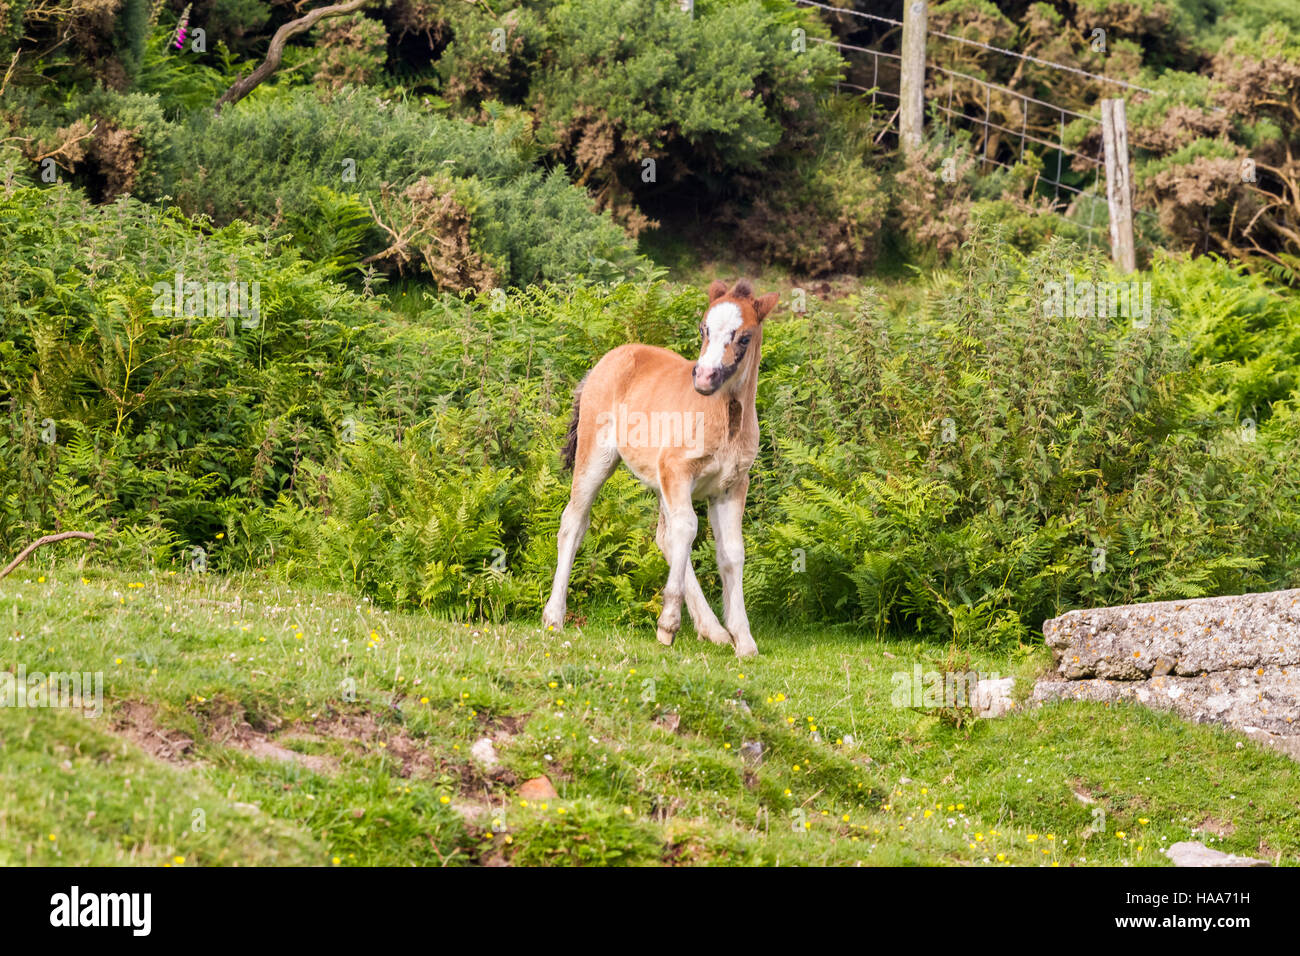 Foal on a pasture peering at the photographer Stock Photo